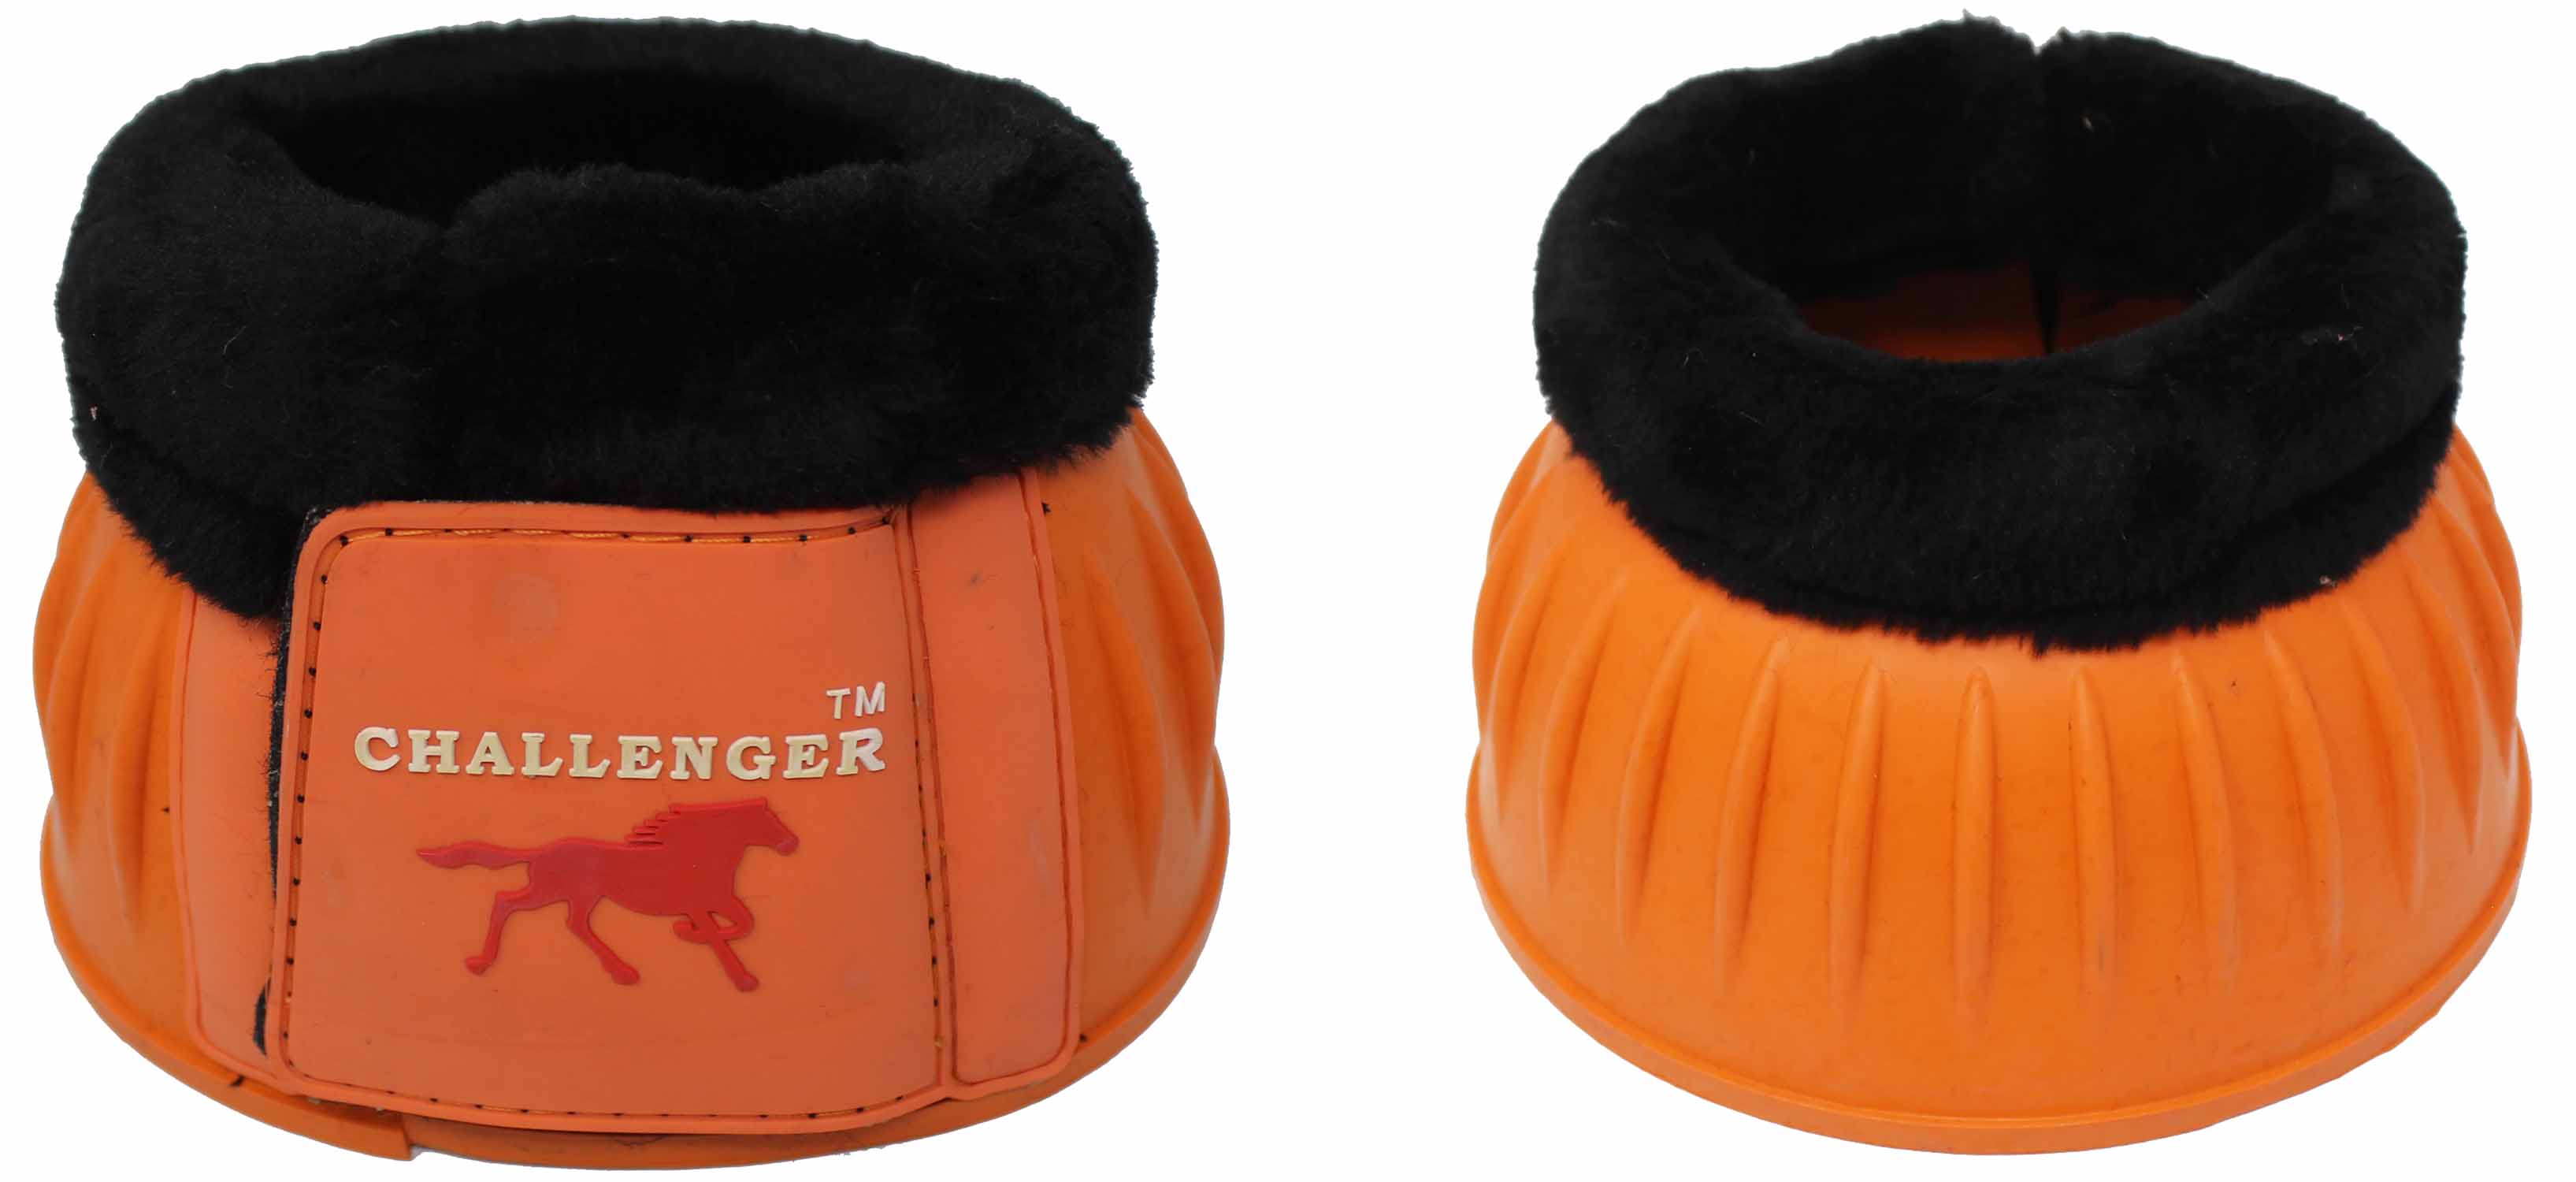 Challenger Horse X-Large  Training Ribbed Rubber Hoof Impact Overreach Protection Fleece Lined Bell Boots Orange 41HI01OR-XL